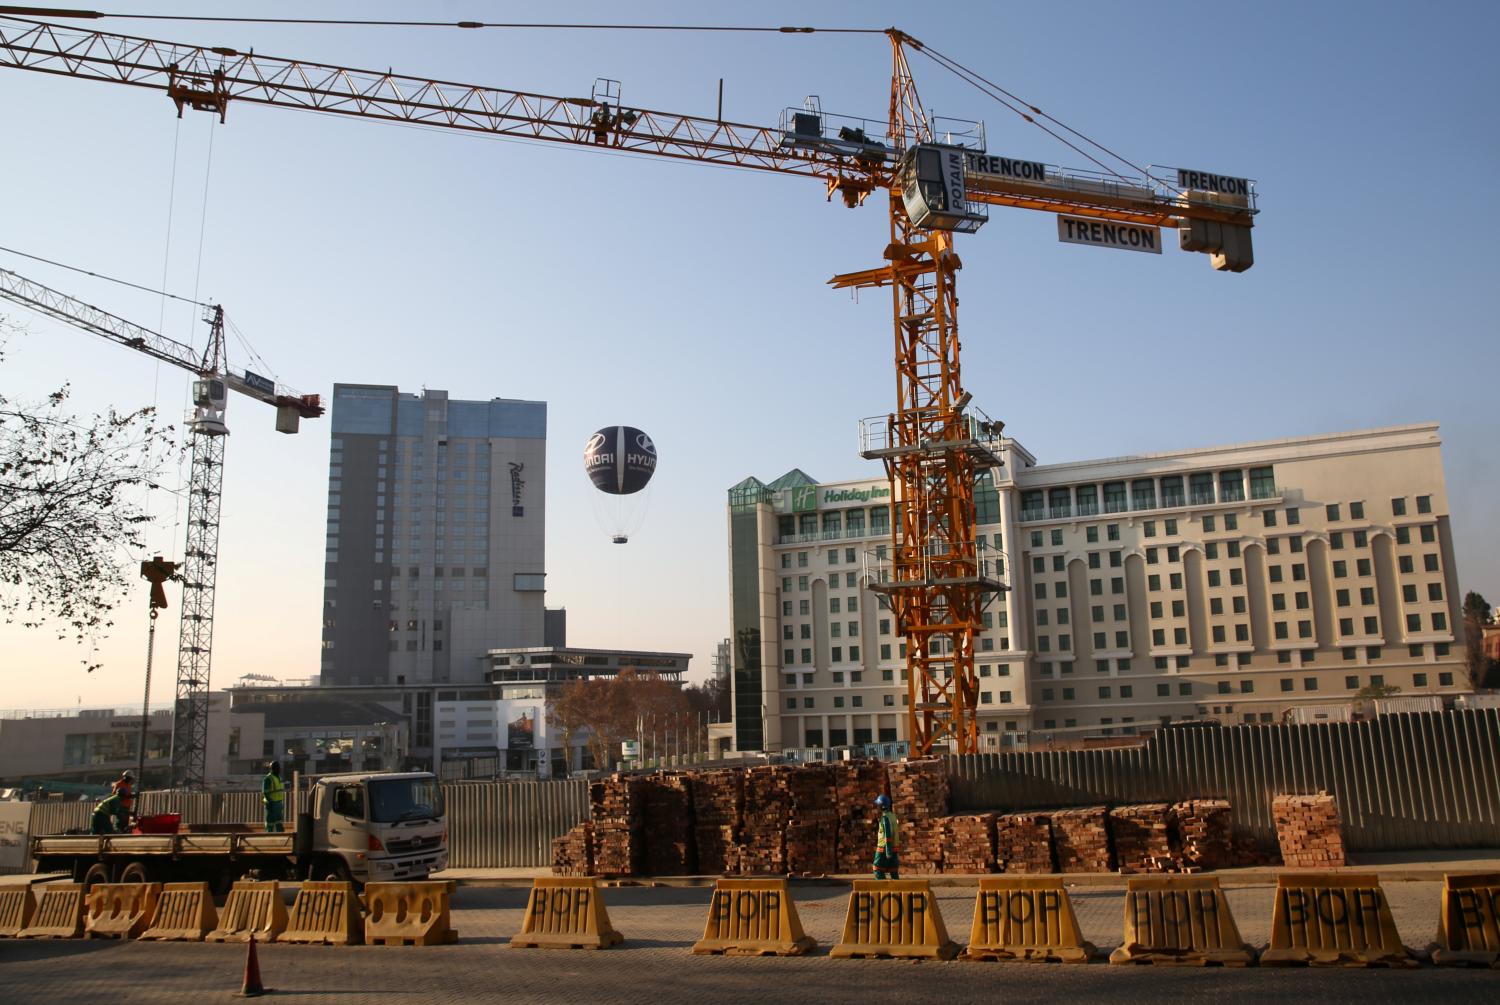 Cranes are seen at a construction site in Sandton outside Johannesburg